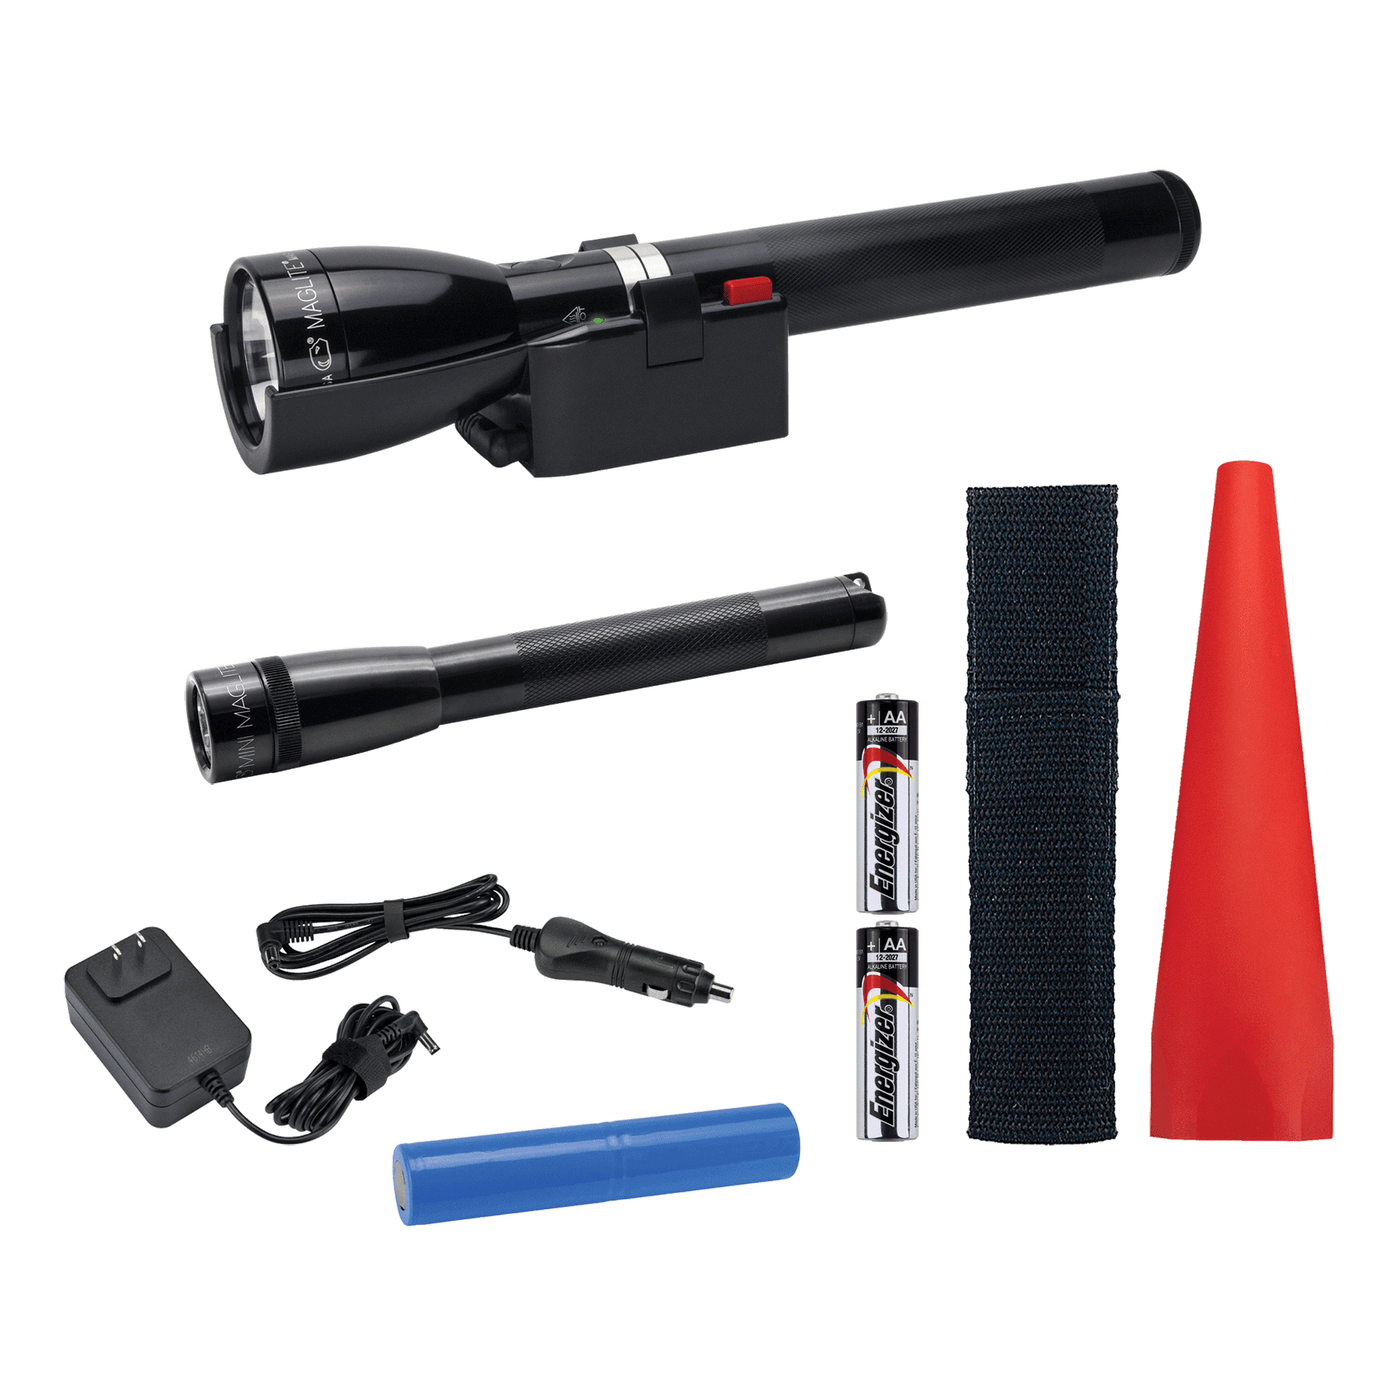 Maglite ML150LR rechargeable flashlight, charging cradle, battery, 120V and 12V converter, Mini Maglite® Pro AA LED flashlight NOW WITH NEW ECO MODE FEATURE, JUST TWO QUICK TWISTS TO ACTIVATE, AA batteries, AA holster, red safety wand for the ML150LR.